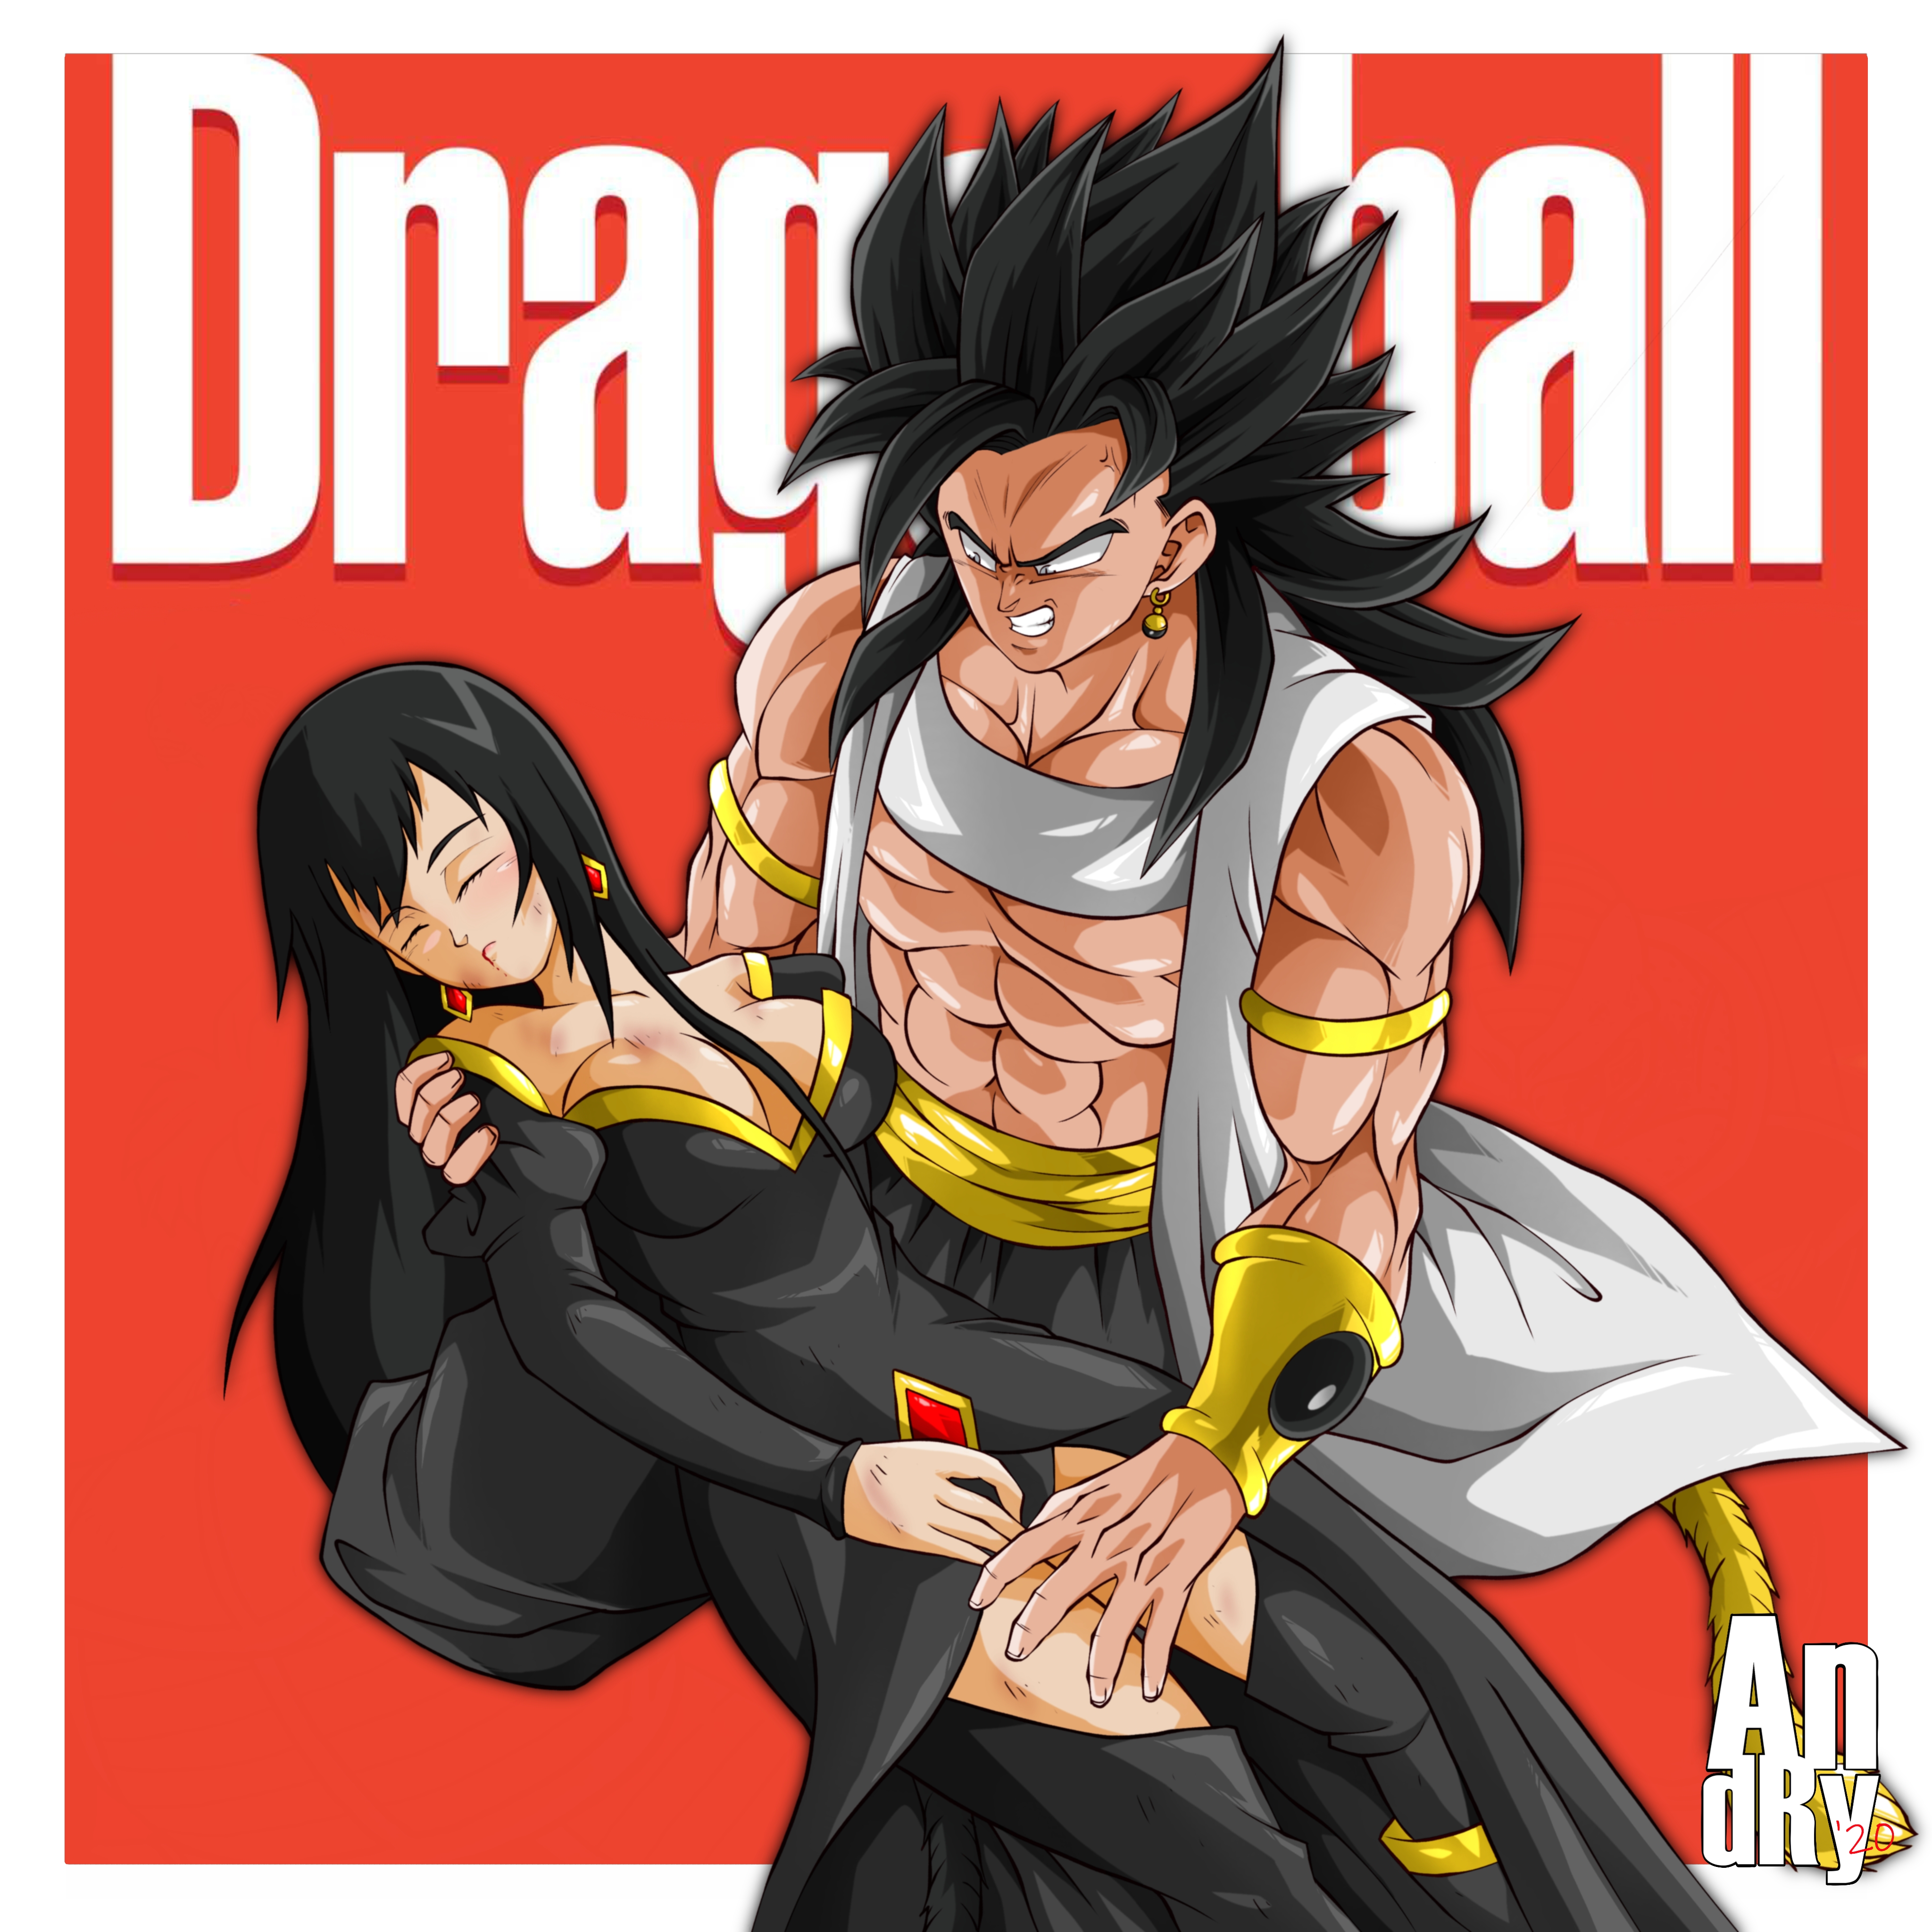 Dragon Ball Online Pets by Hector444 on DeviantArt